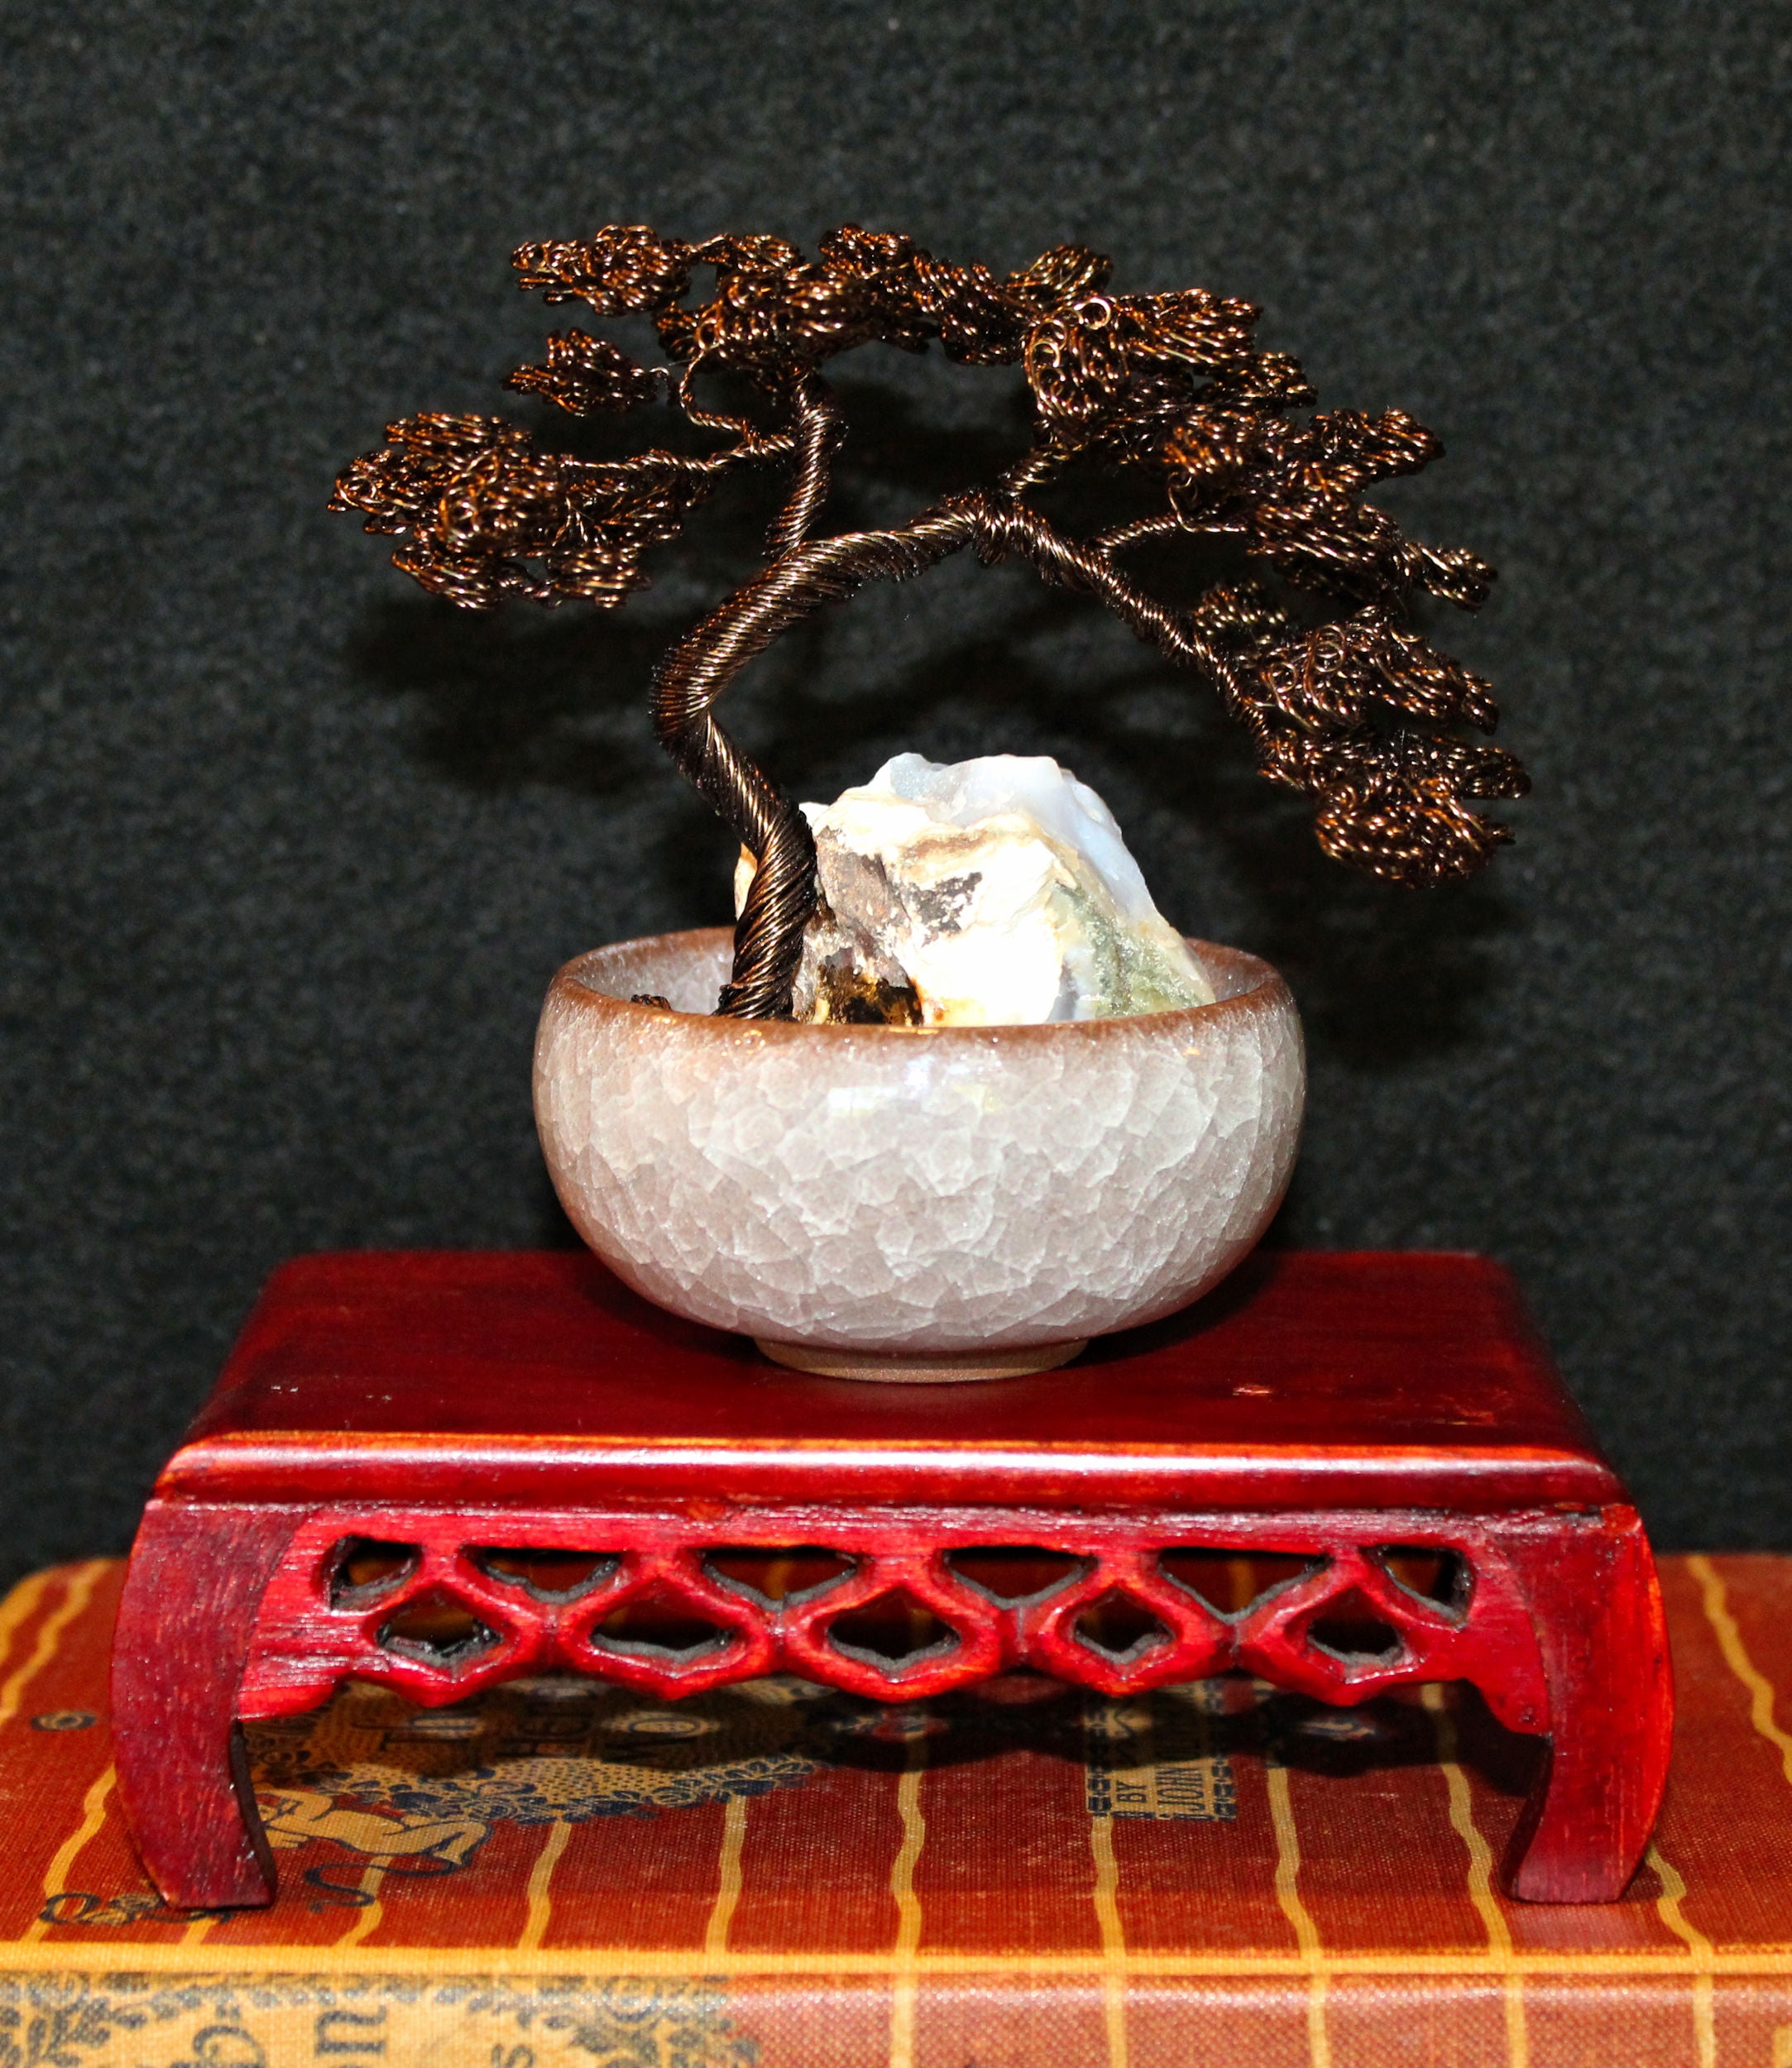 Arched Bonsai Tree over Opalized Wood - SOLD